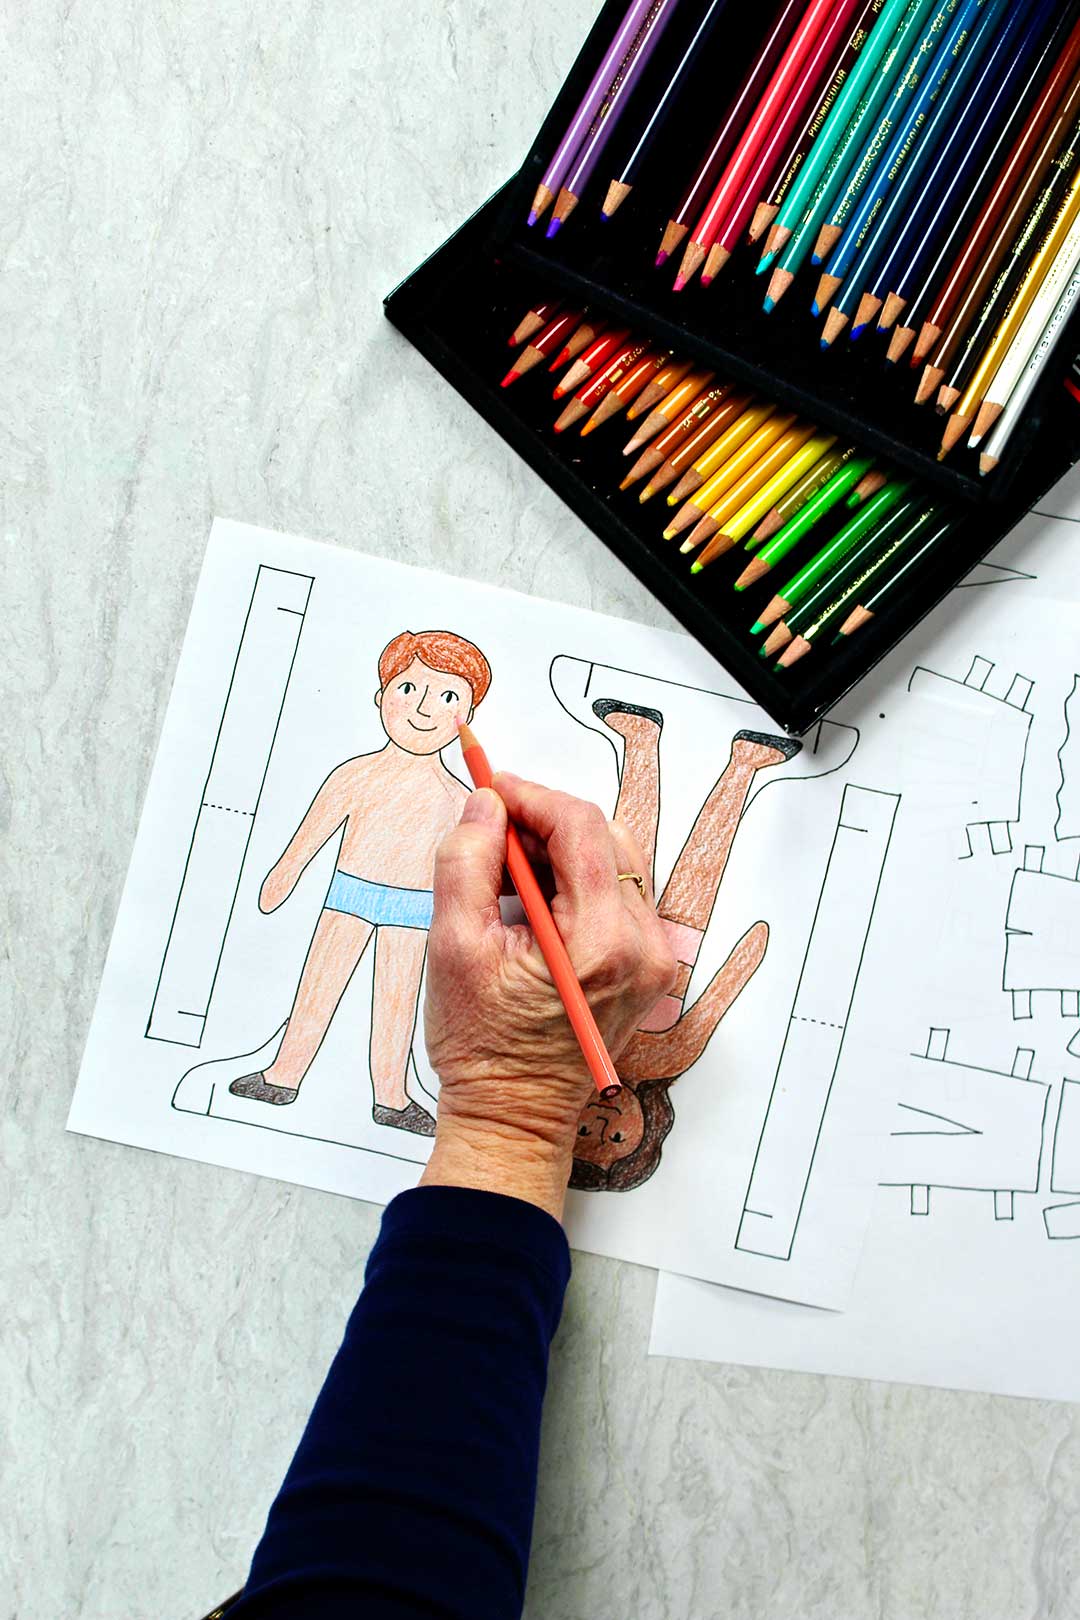 Person coloring paper dolls with orange colored pencils. A rainbow of colored pencils nearby.